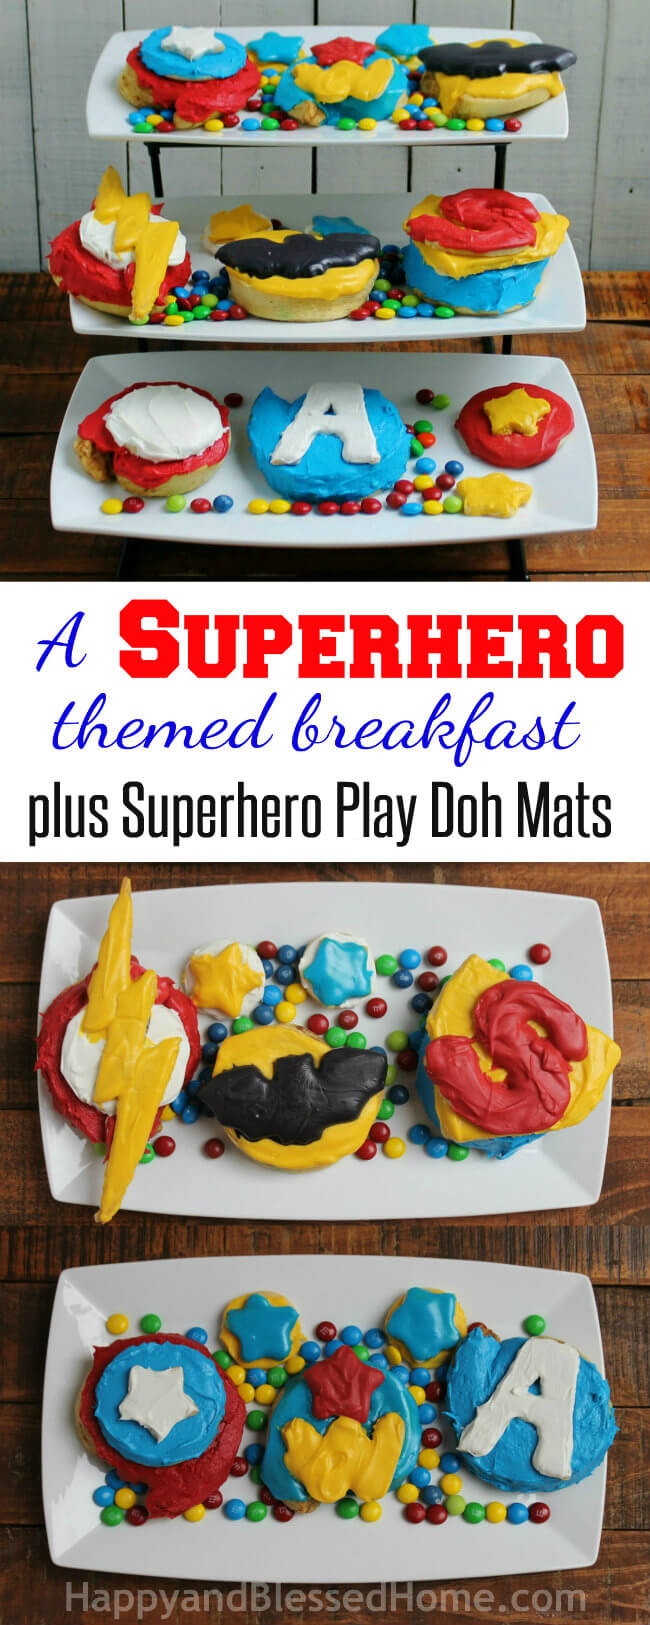 Superhero-Themed-Breakfast-with-Pepperidge-Farm-Sweet-Rolls-and-Play-Doh-Placemats-for-Kids-from-HappyandBlessedHome